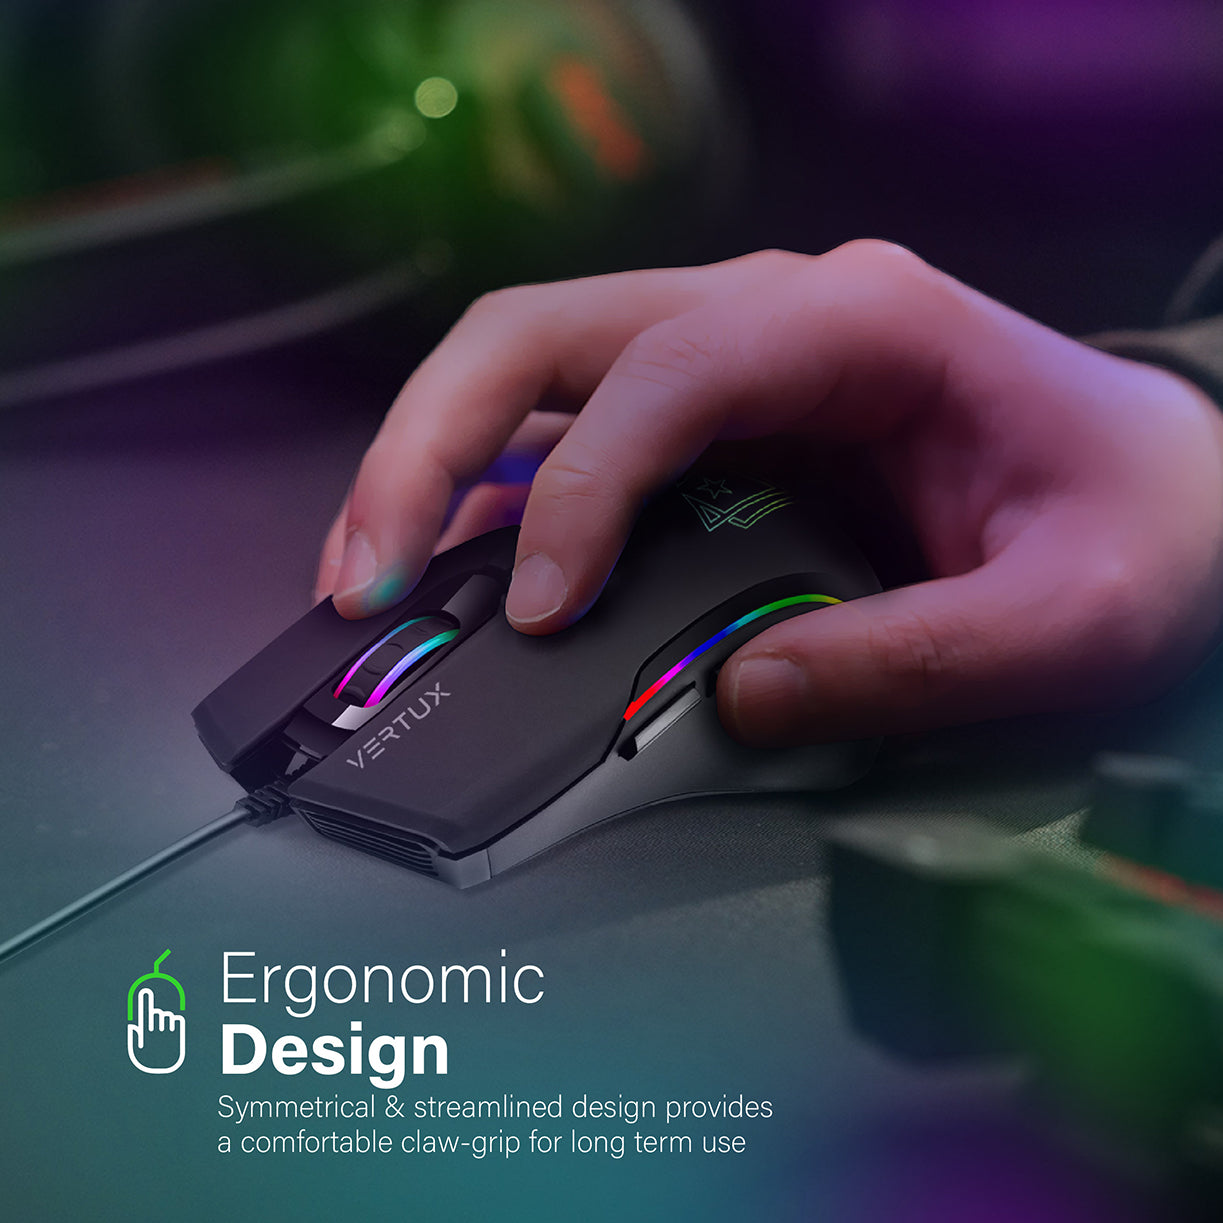 GameCharged™ Lightweight Gaming Mouse